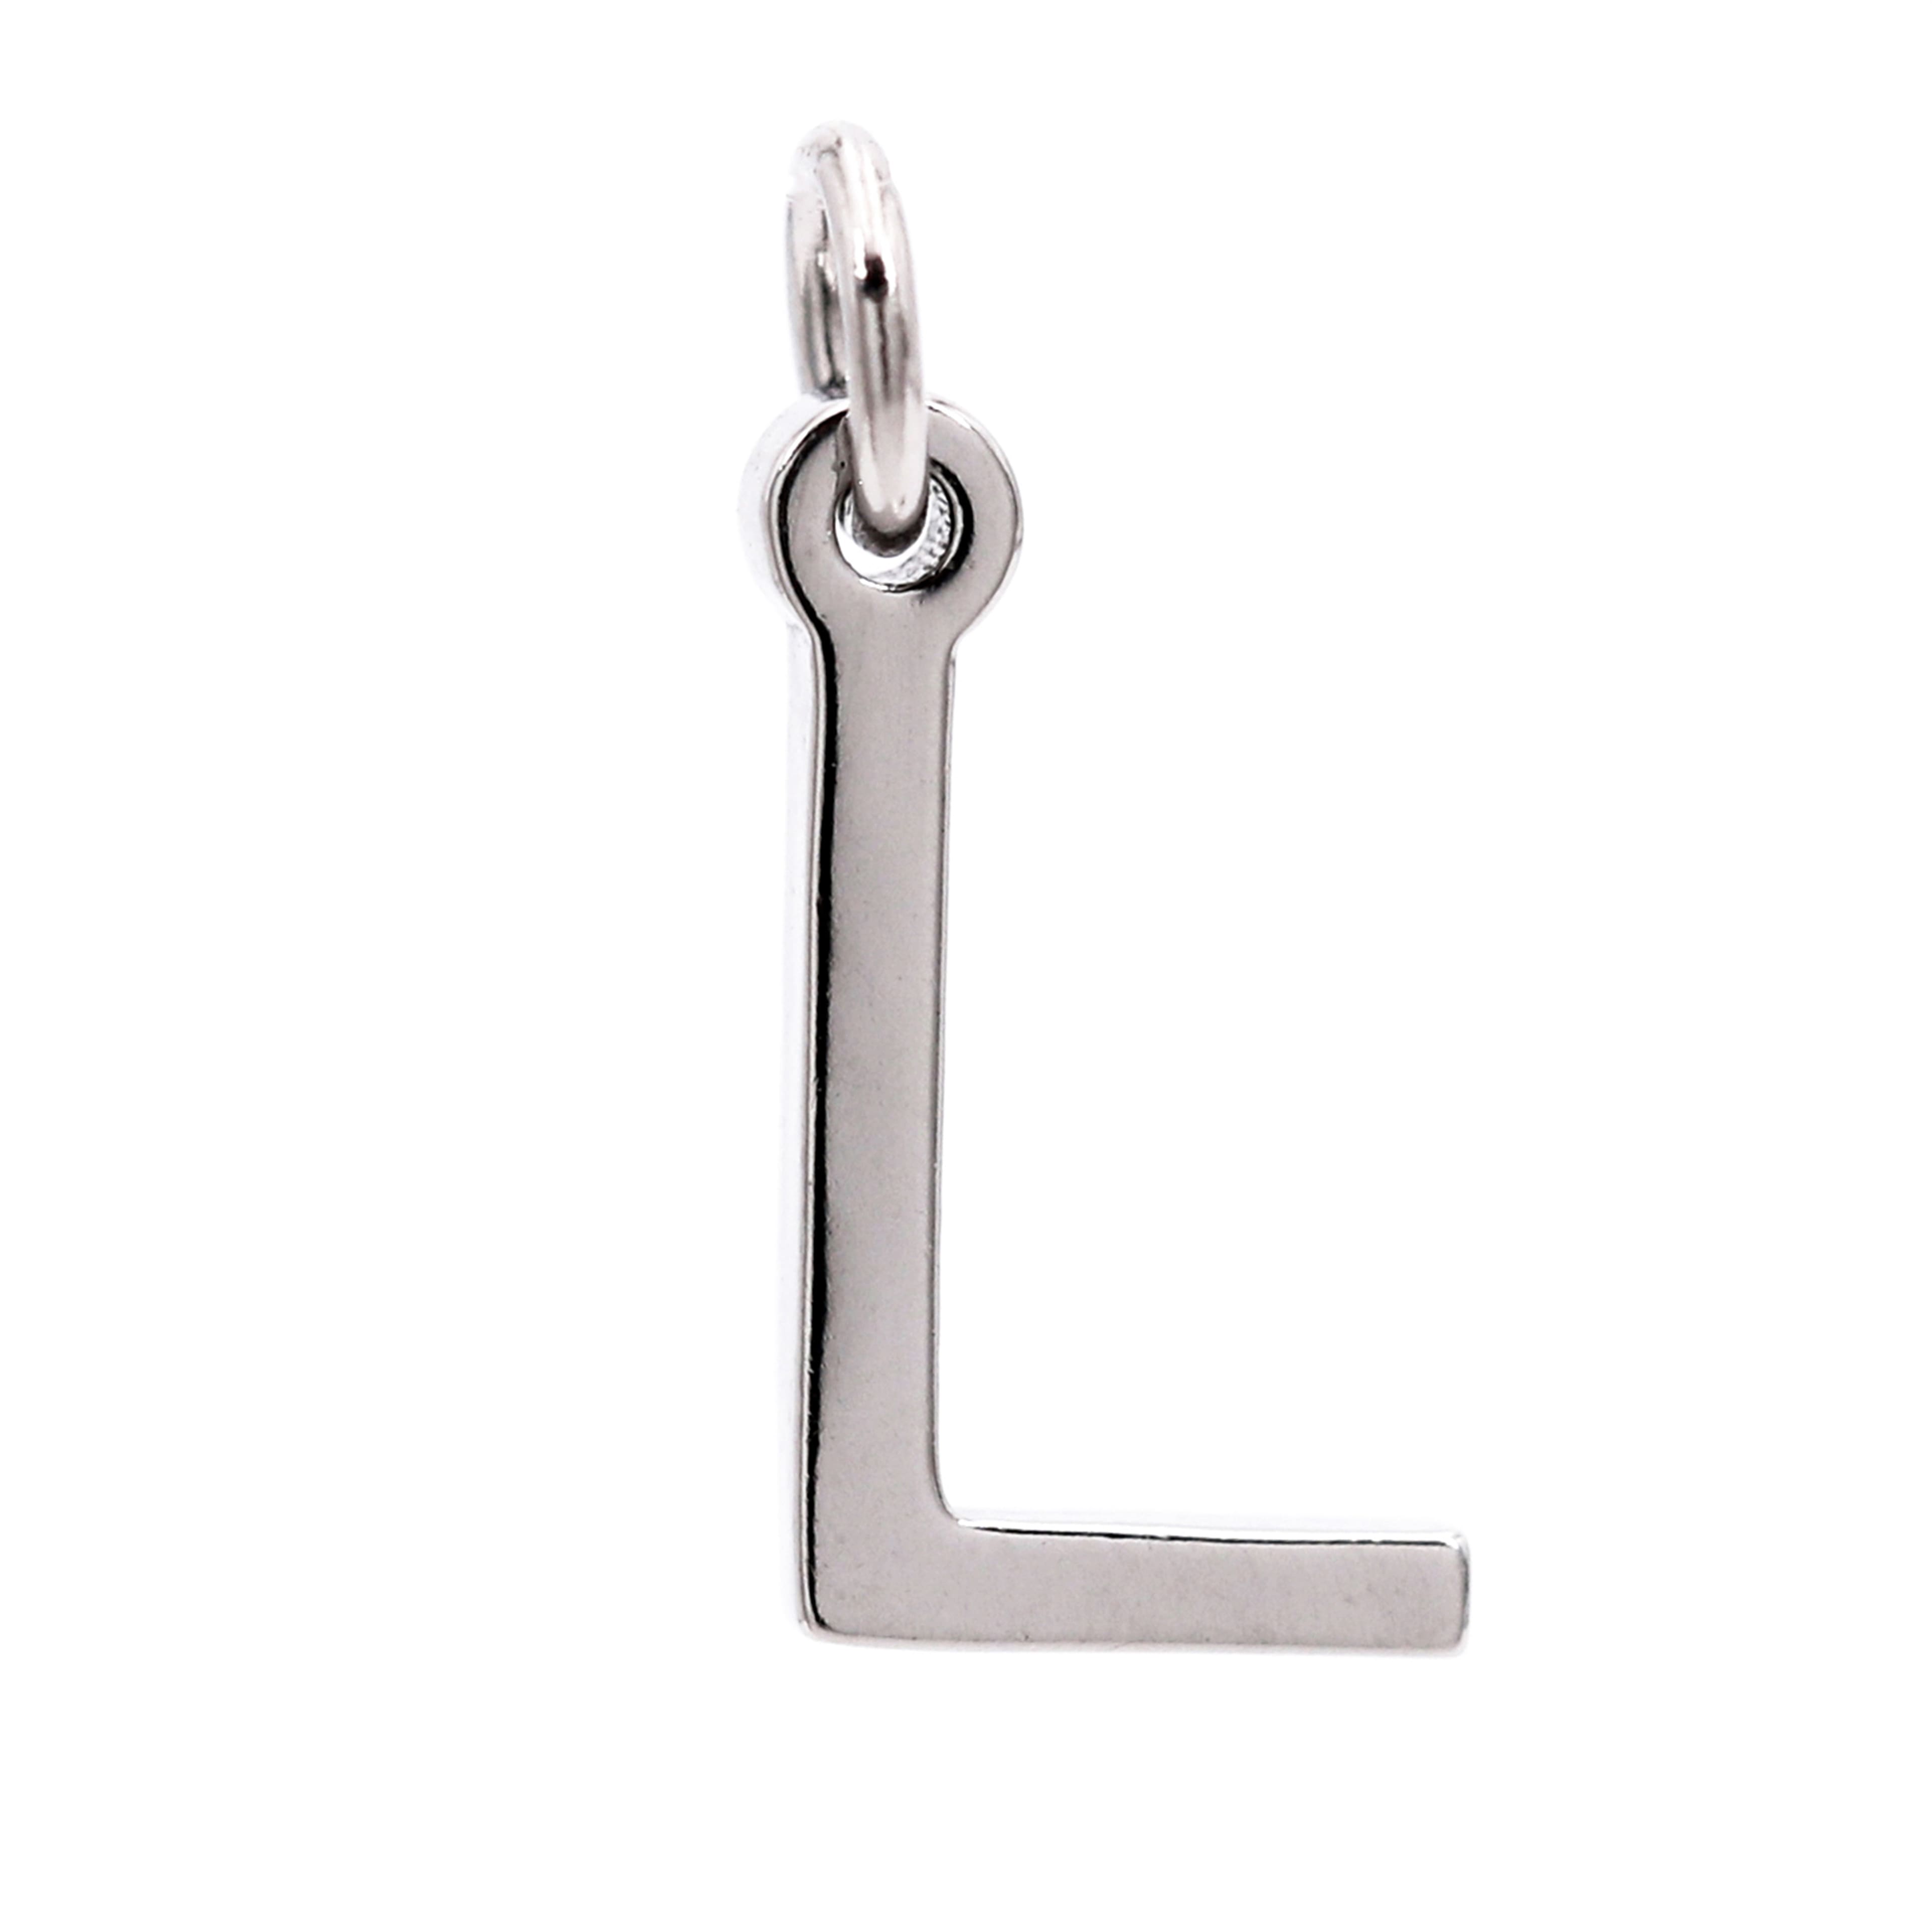 Bead Landing Metal Letter Charms in Silver | Michaels